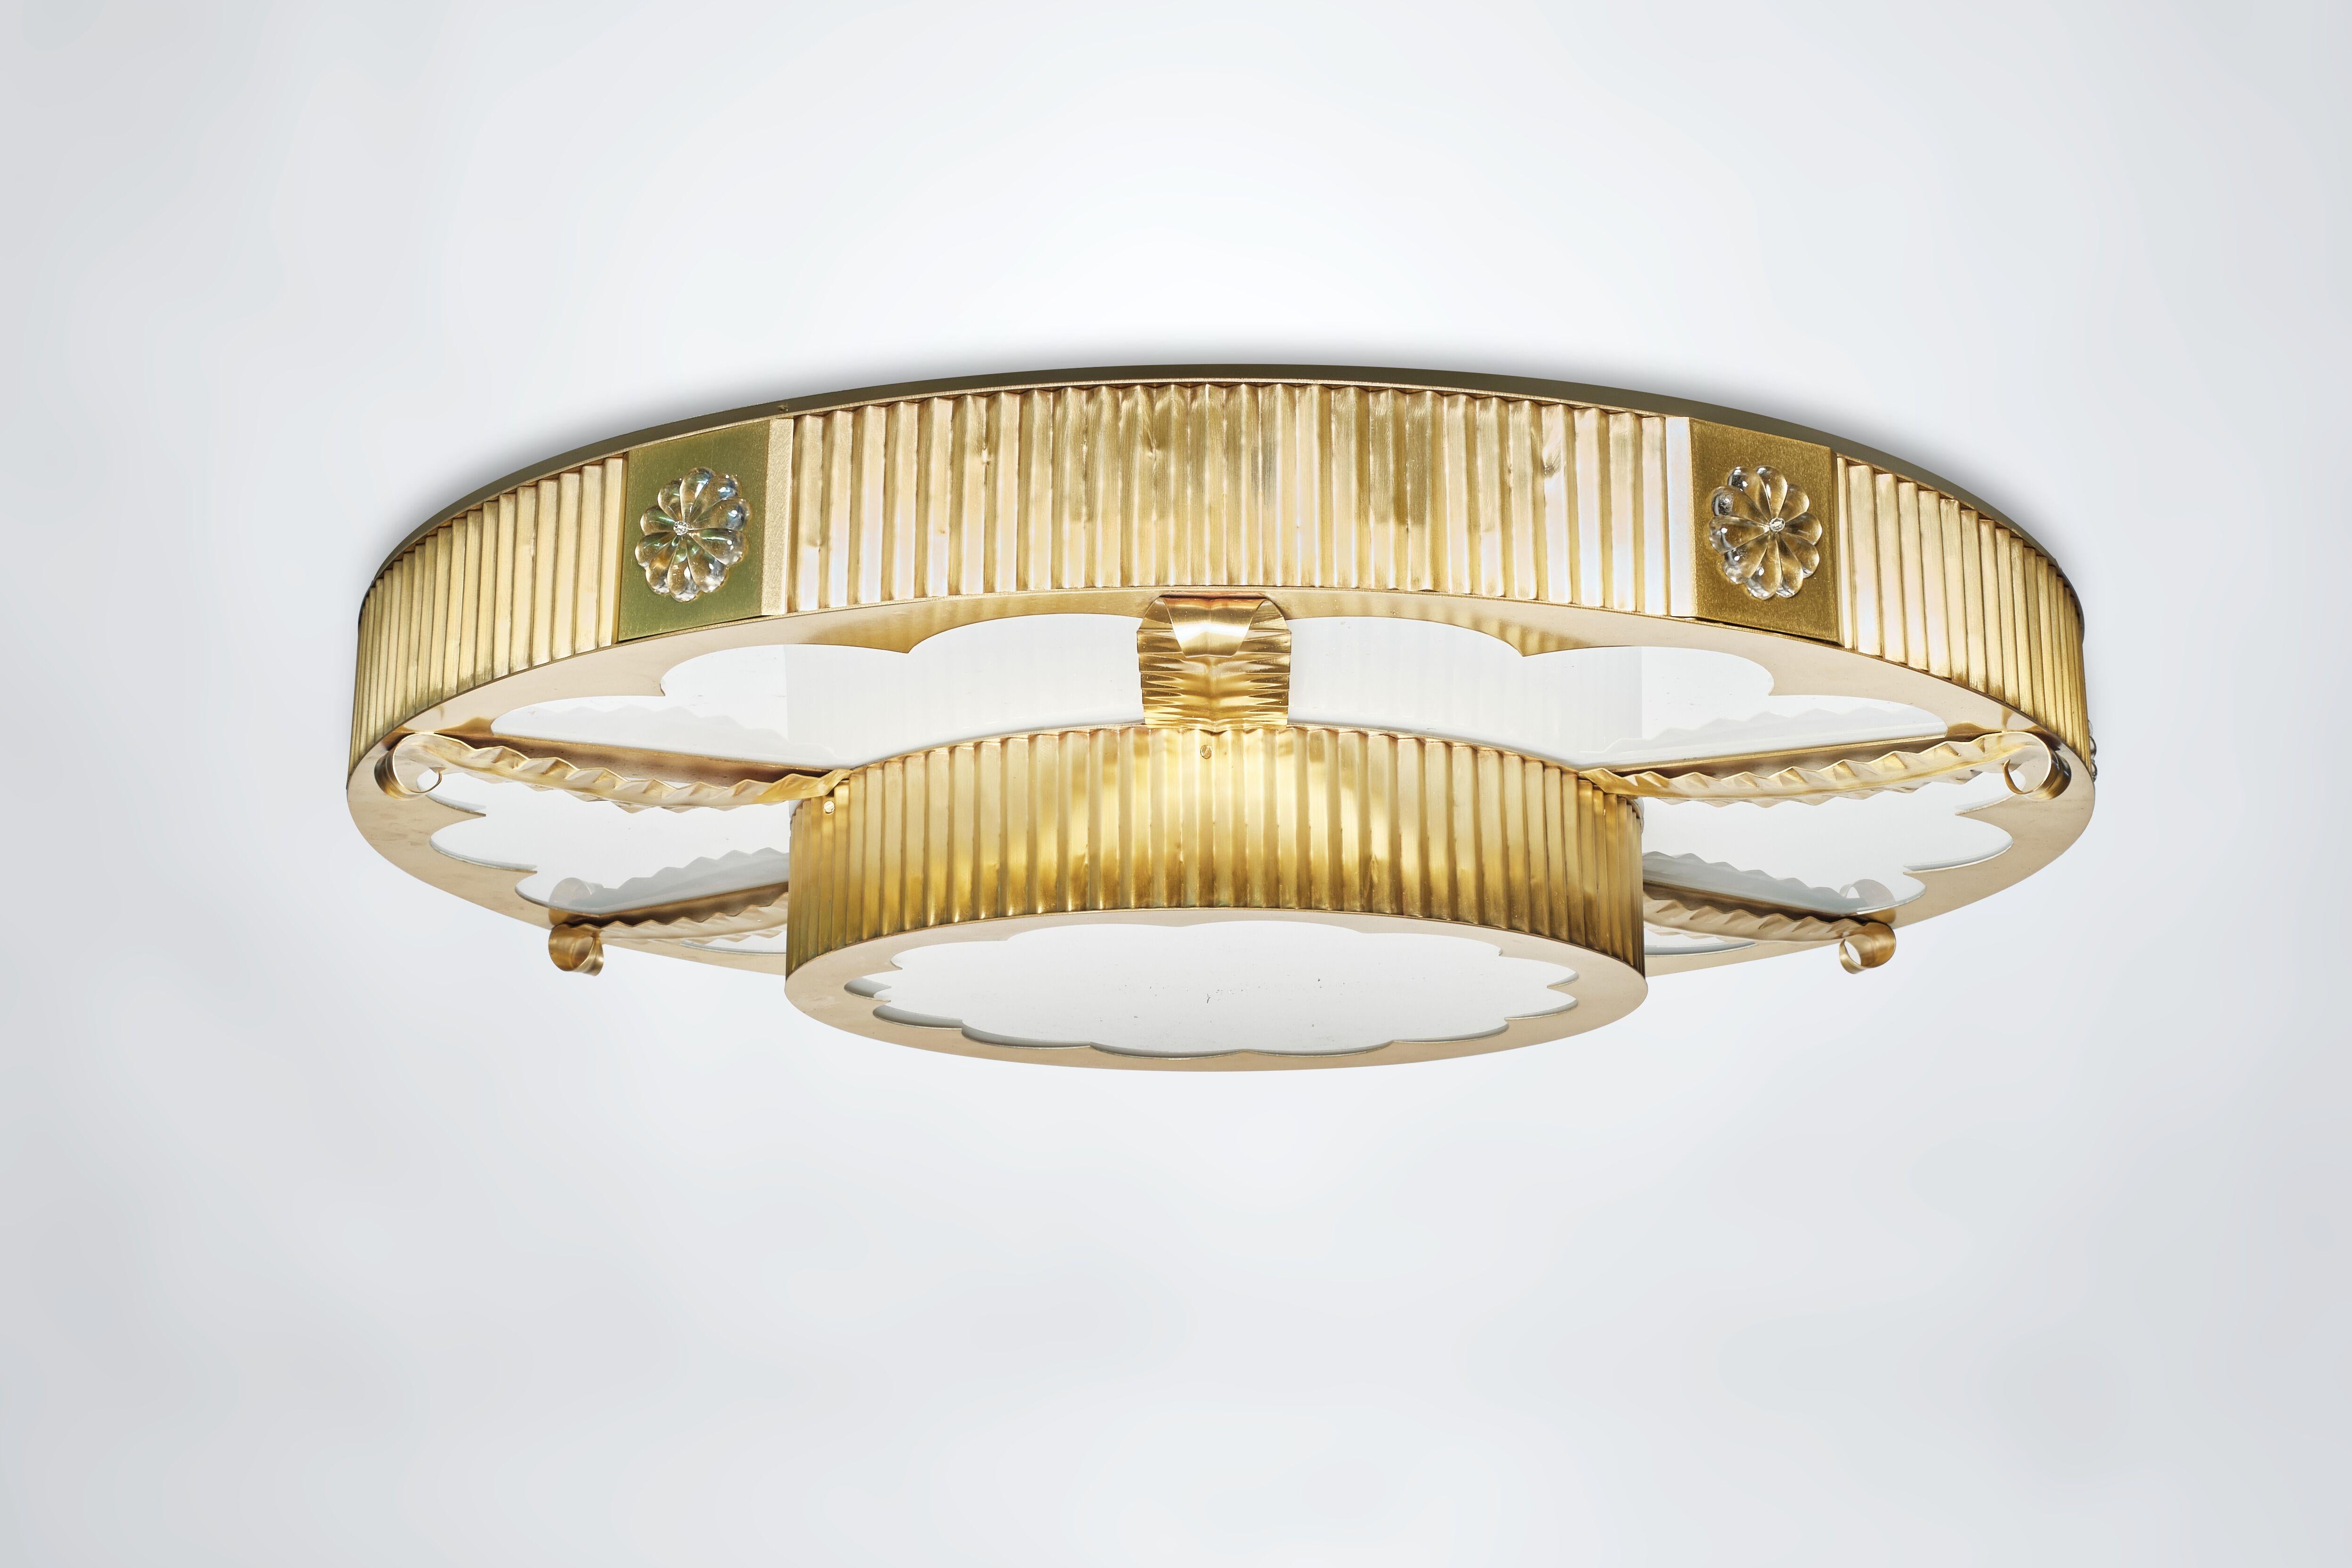 A large scale, custom Art Deco-style flush mounted light fixture designed by David Duncan. This elegant fixture features two tiers of corrugated brass sides adorned with Czech glass rosettes. 15 candelabra sockets. This light is also available as a